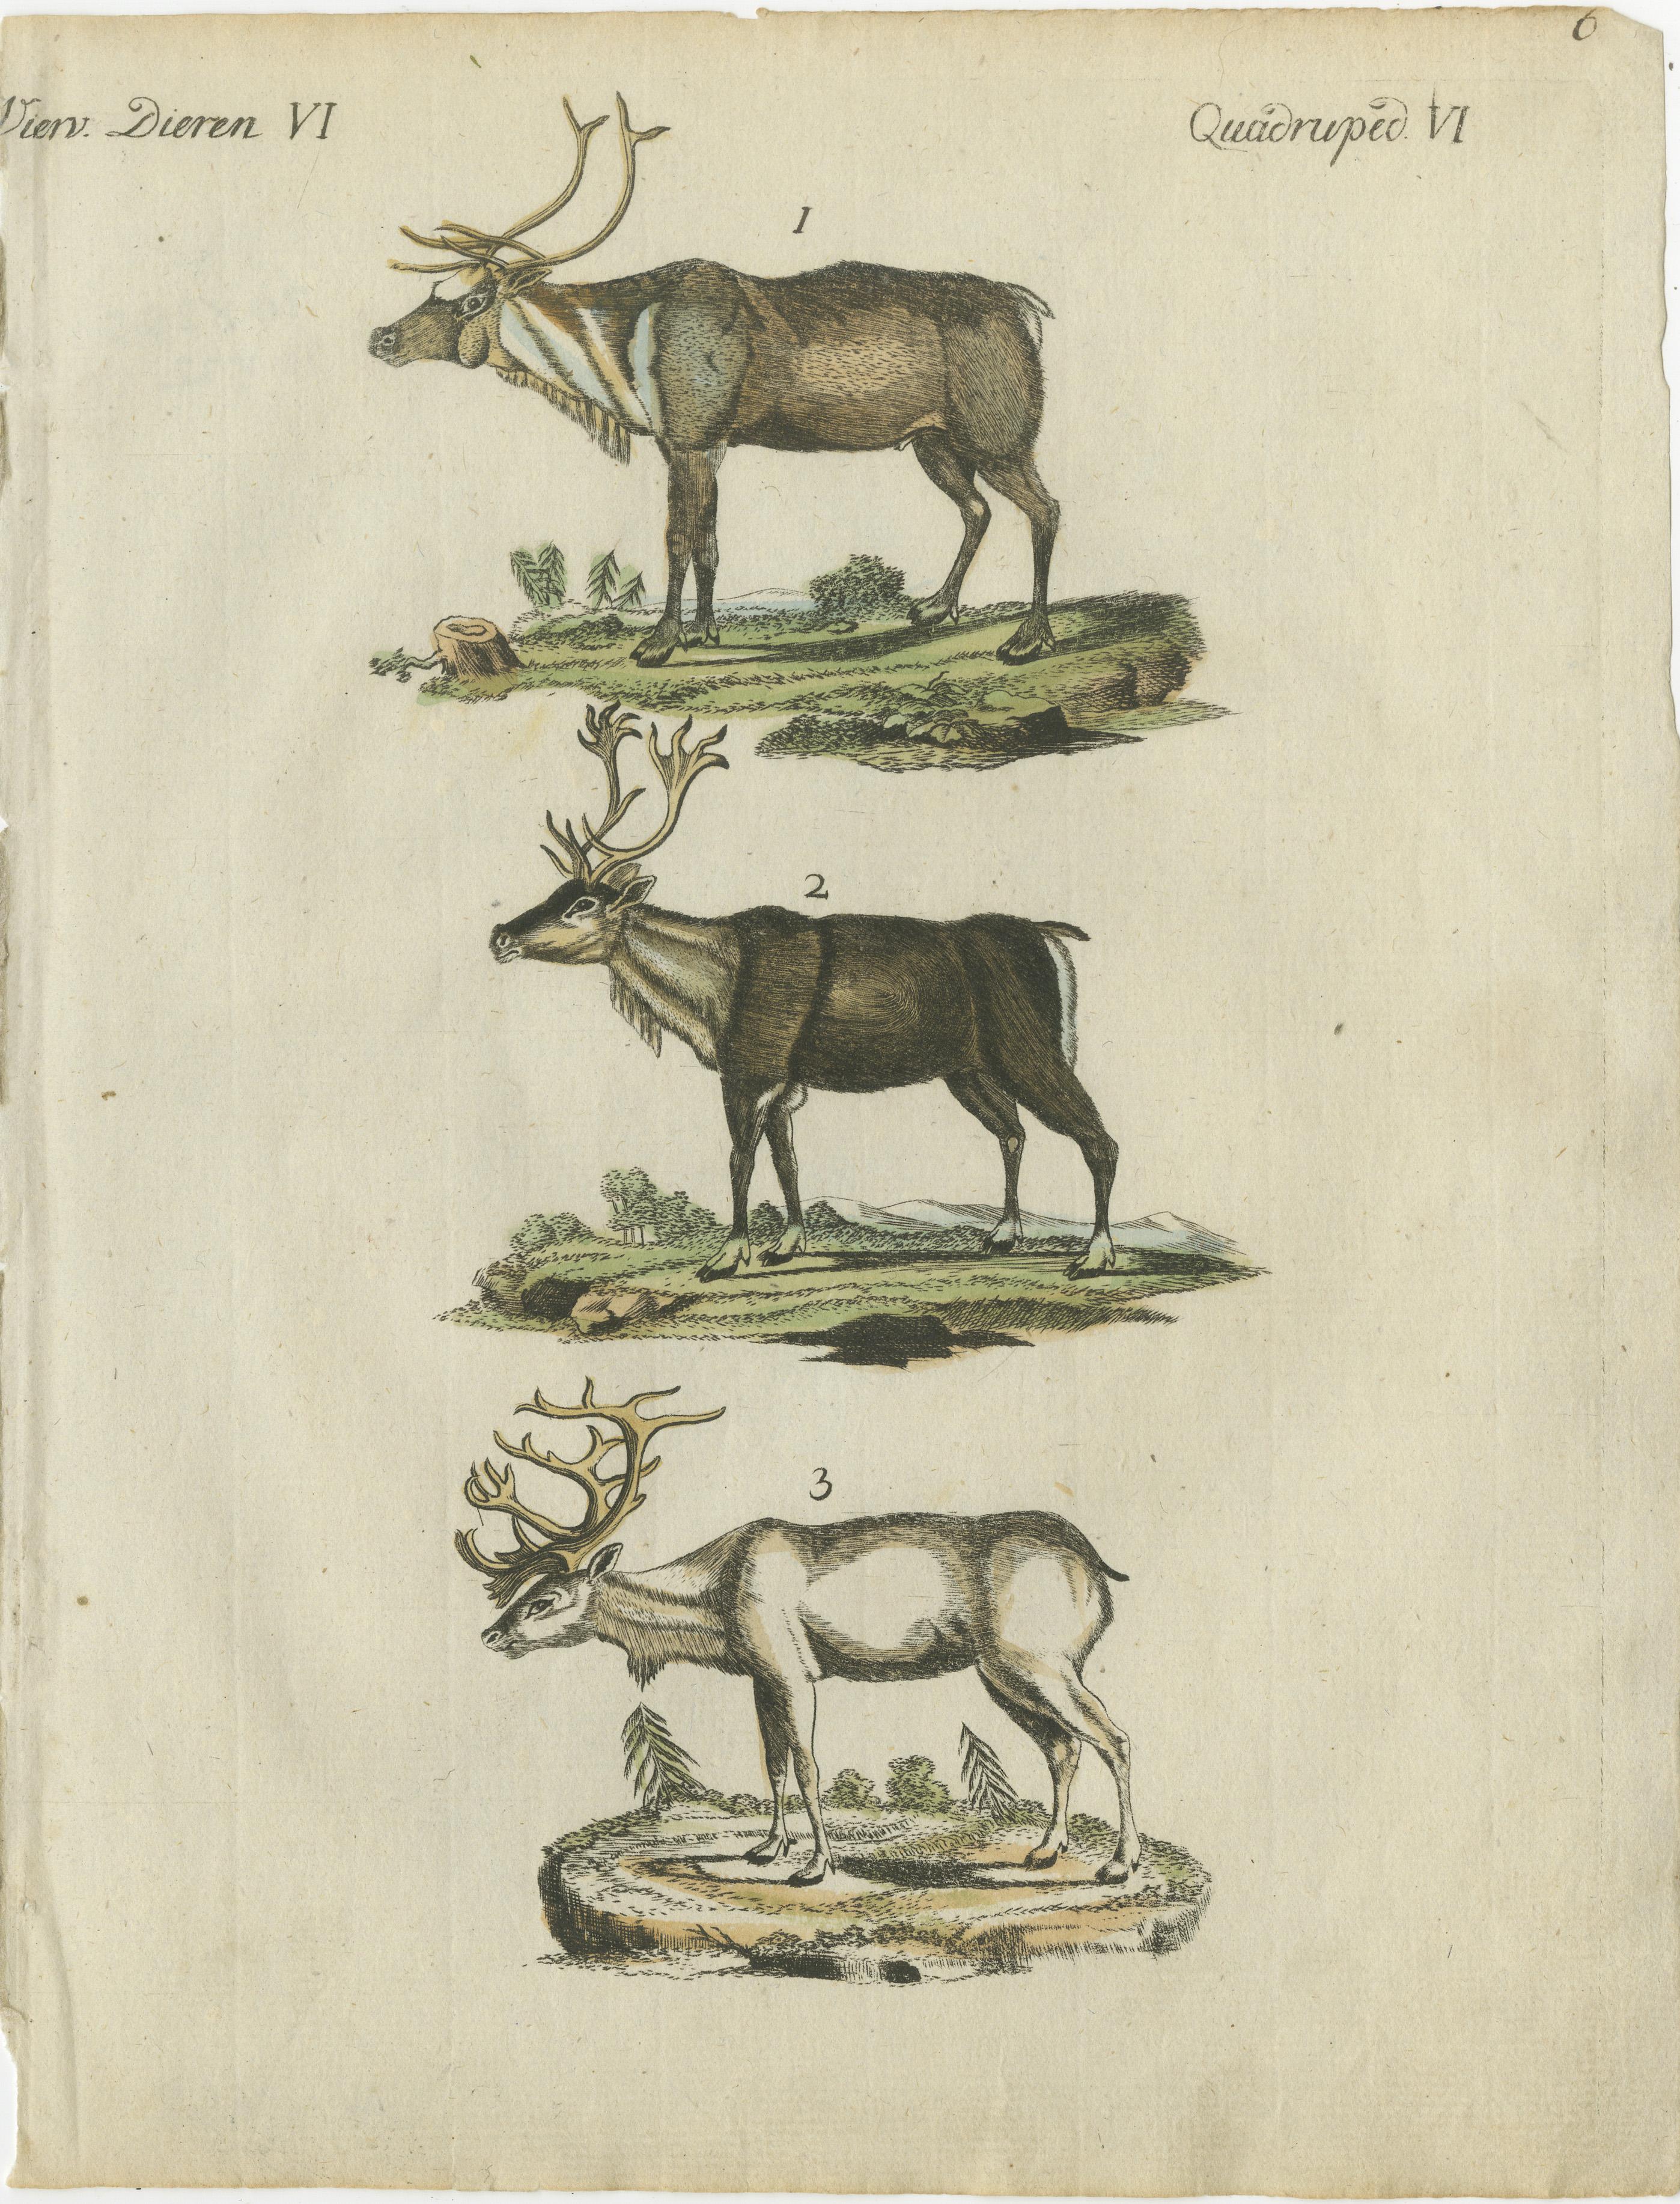 Original antique print of reindeer. This engraved print originates from a very rare unknown Dutch work. The plates are similar to the plates in the famous German work: ‘Bilderbuch fur Kinder' by F.J. Bertuch, published 1790-1830 in Weimar. This